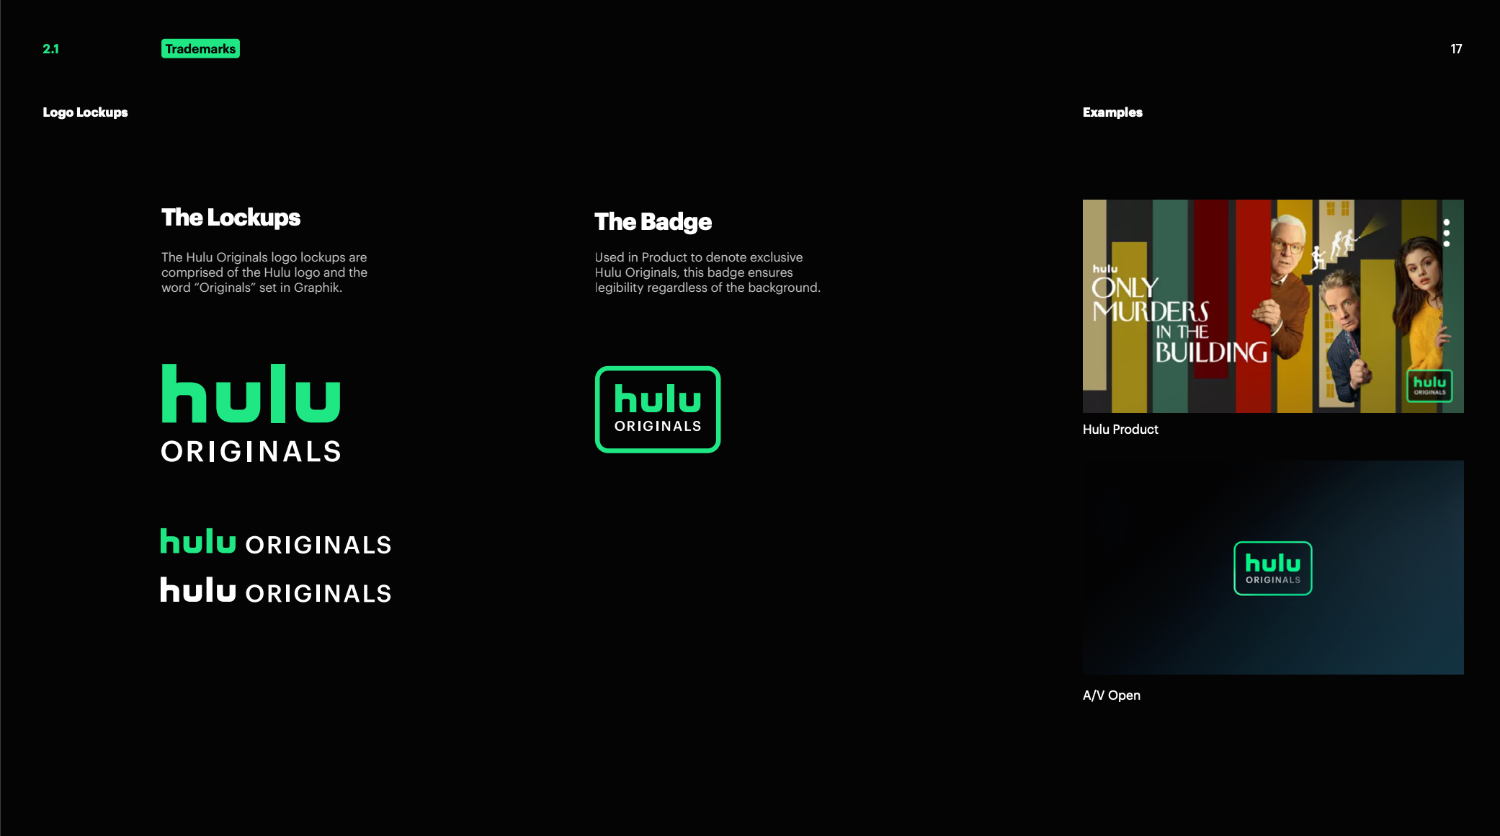 Brand guidelines from brand Hulu